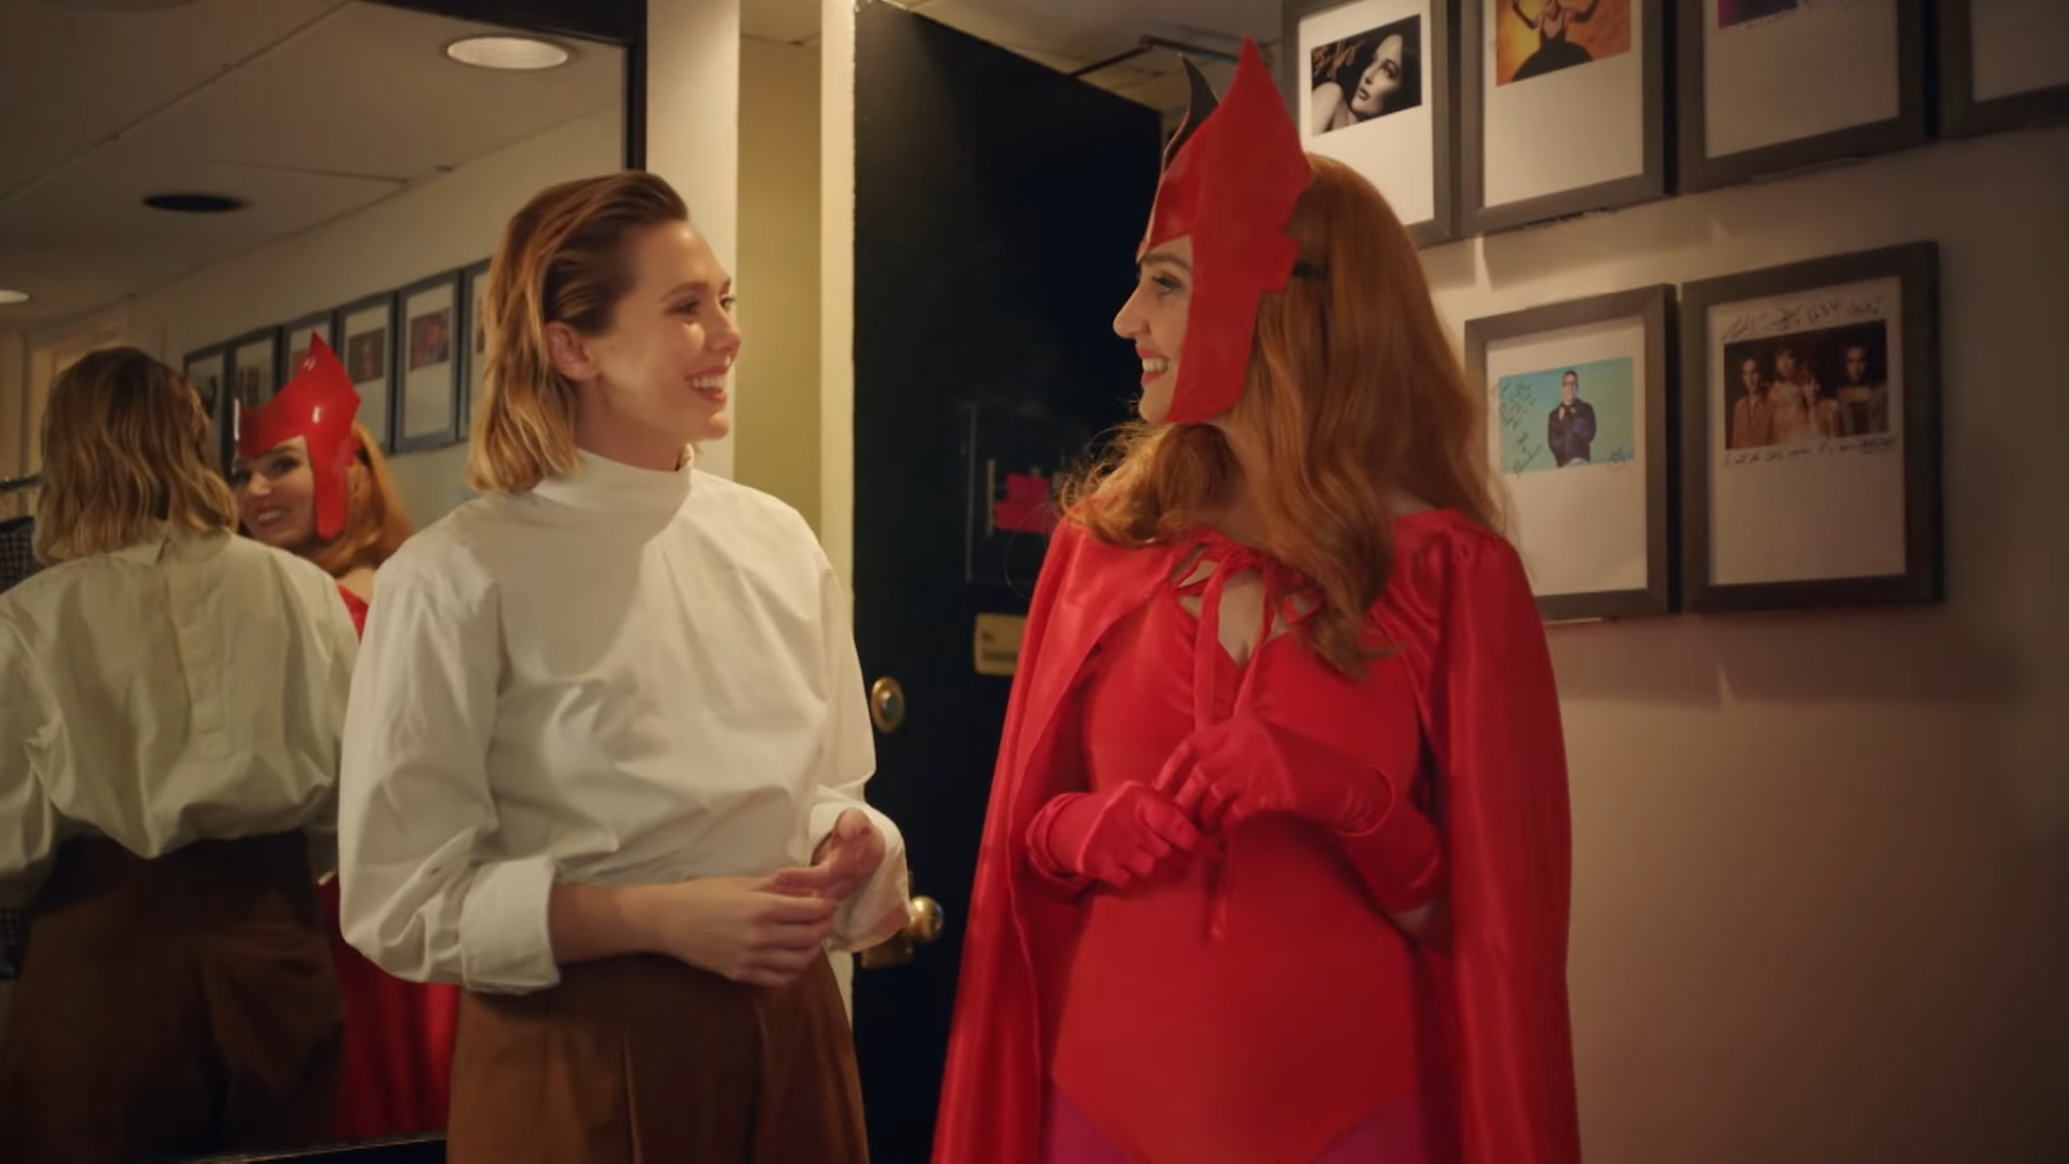 Elizabeth Olsen, dressed in regular clothes, and 'SNL' cast member Chloe Fineman, dressed in a Scarlet Witch costume, stare at each other, smiling.